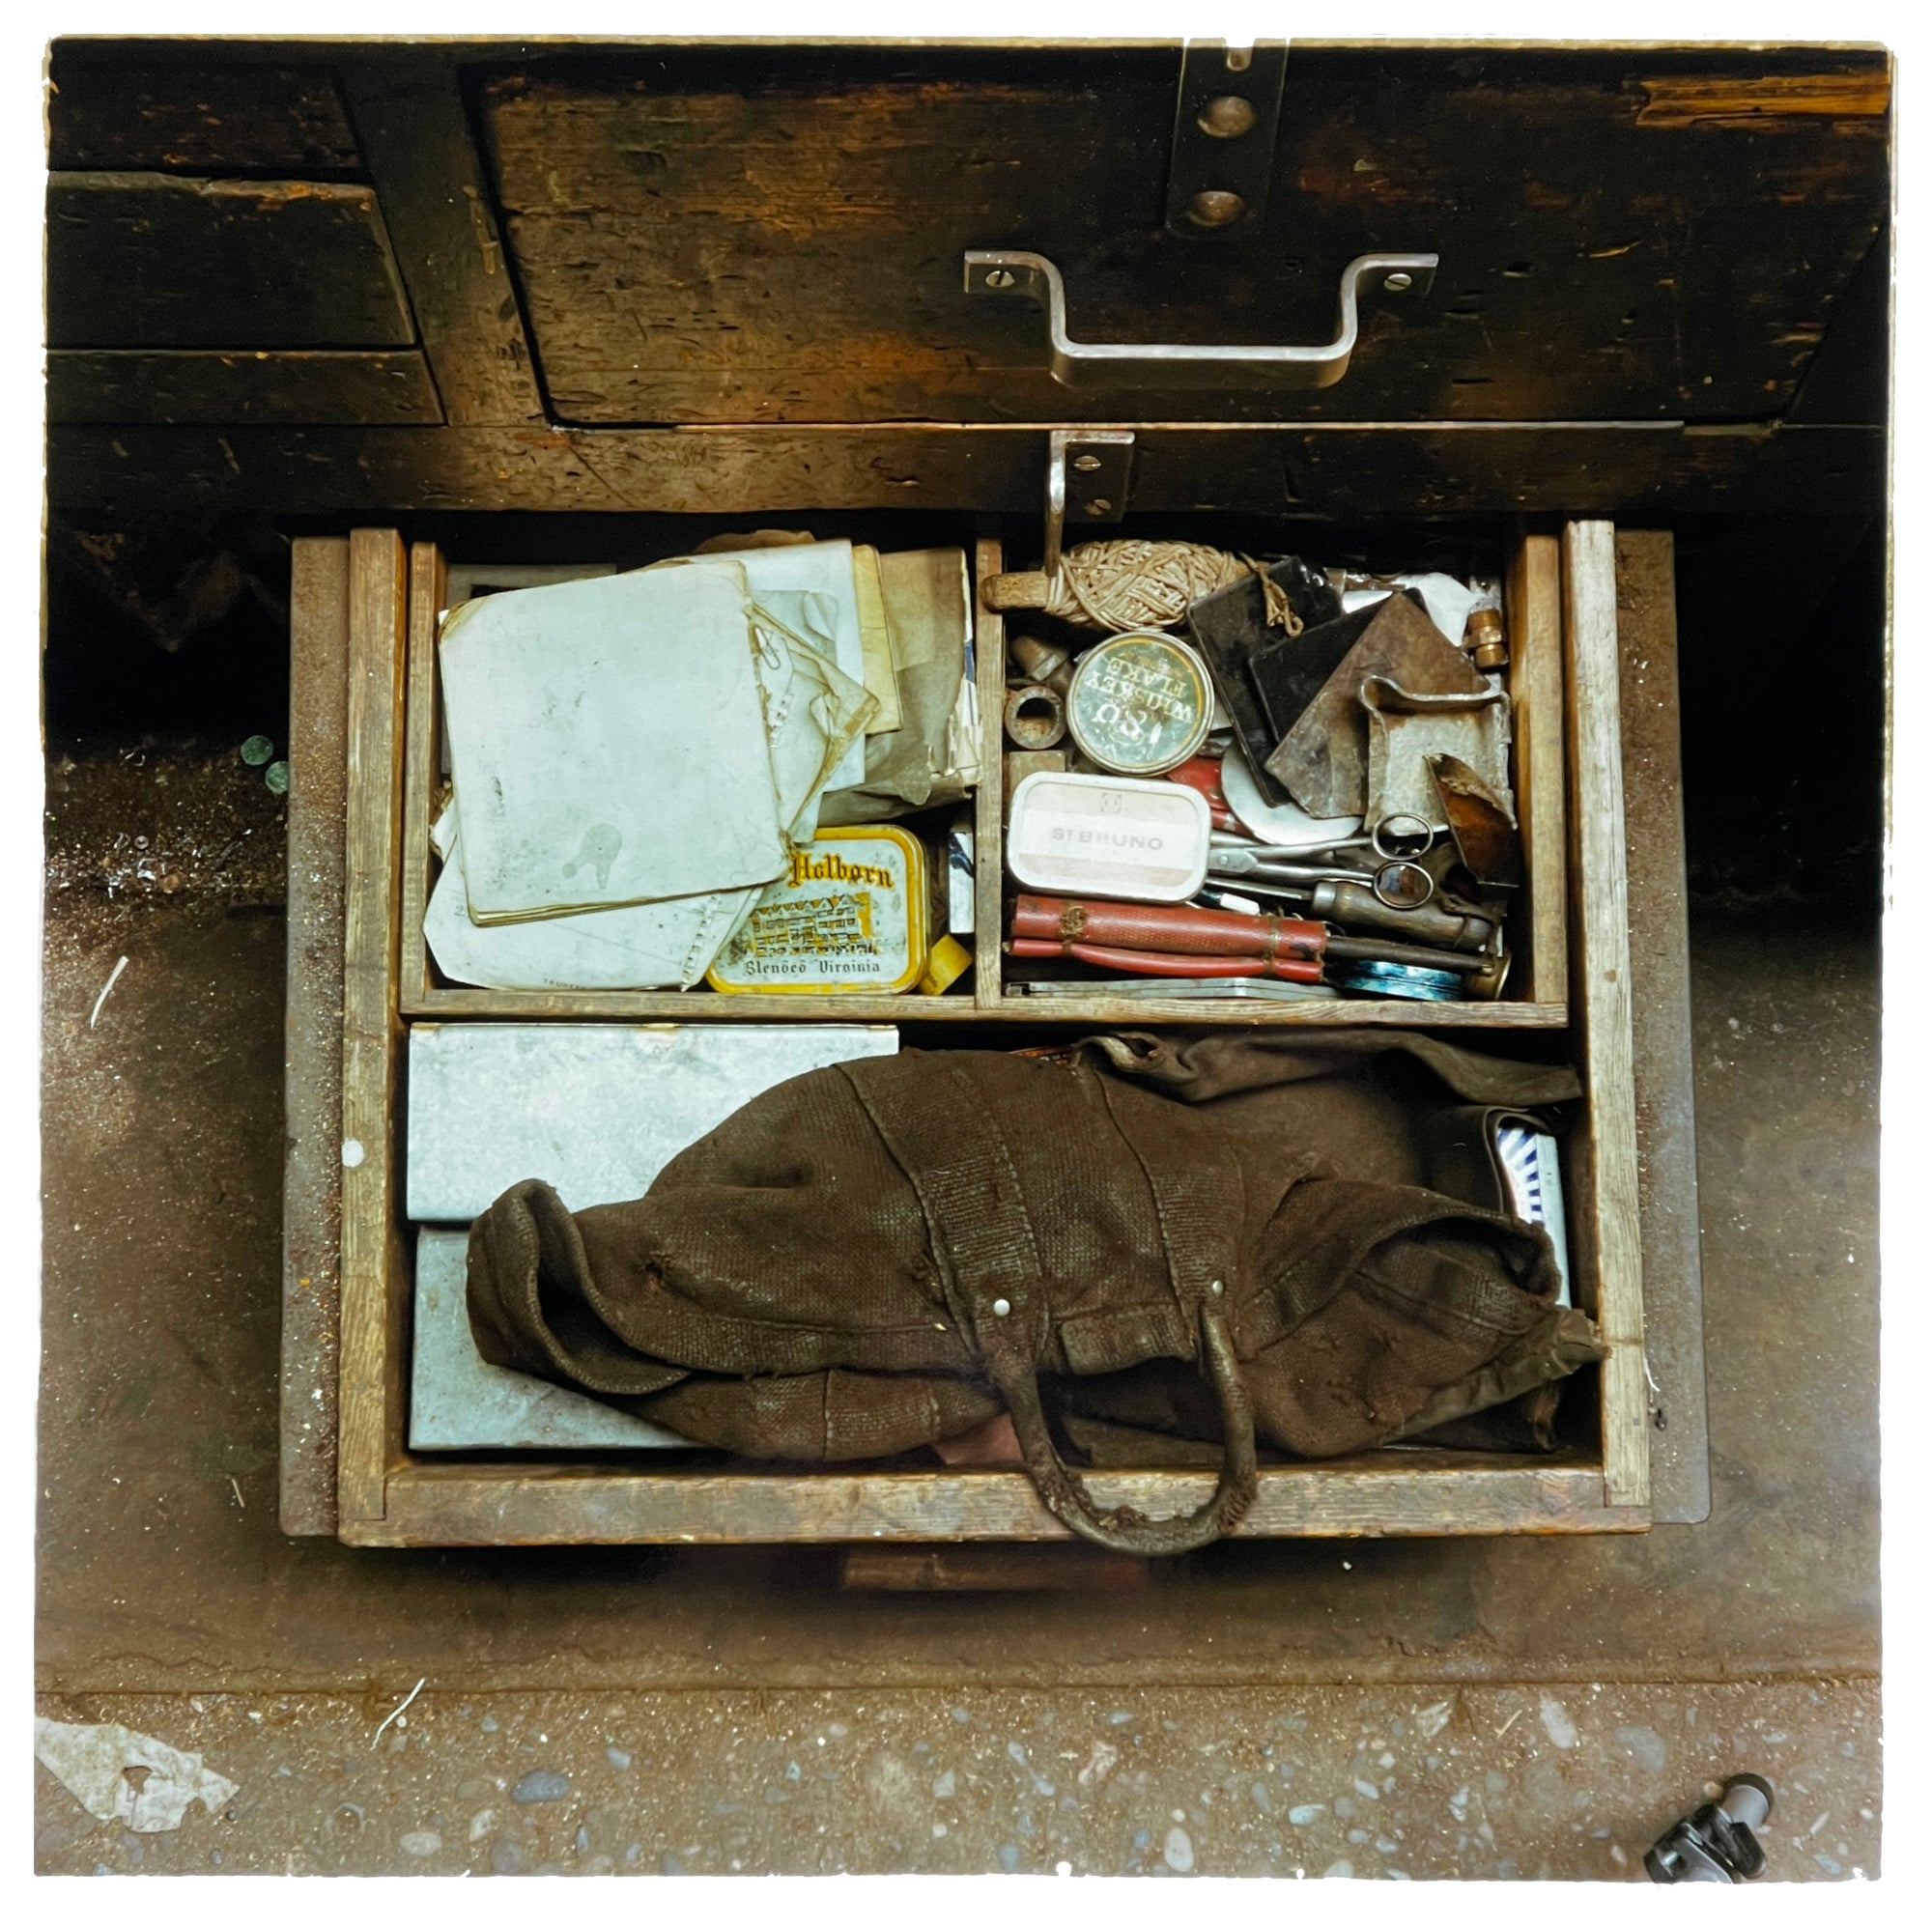 Photograph by Richard Heeps.  The bottom drawer of a battered wooden work desk is open.  There is tobacco, a worn leather tool bag, a spool of string, scissors and other paraphernalia.